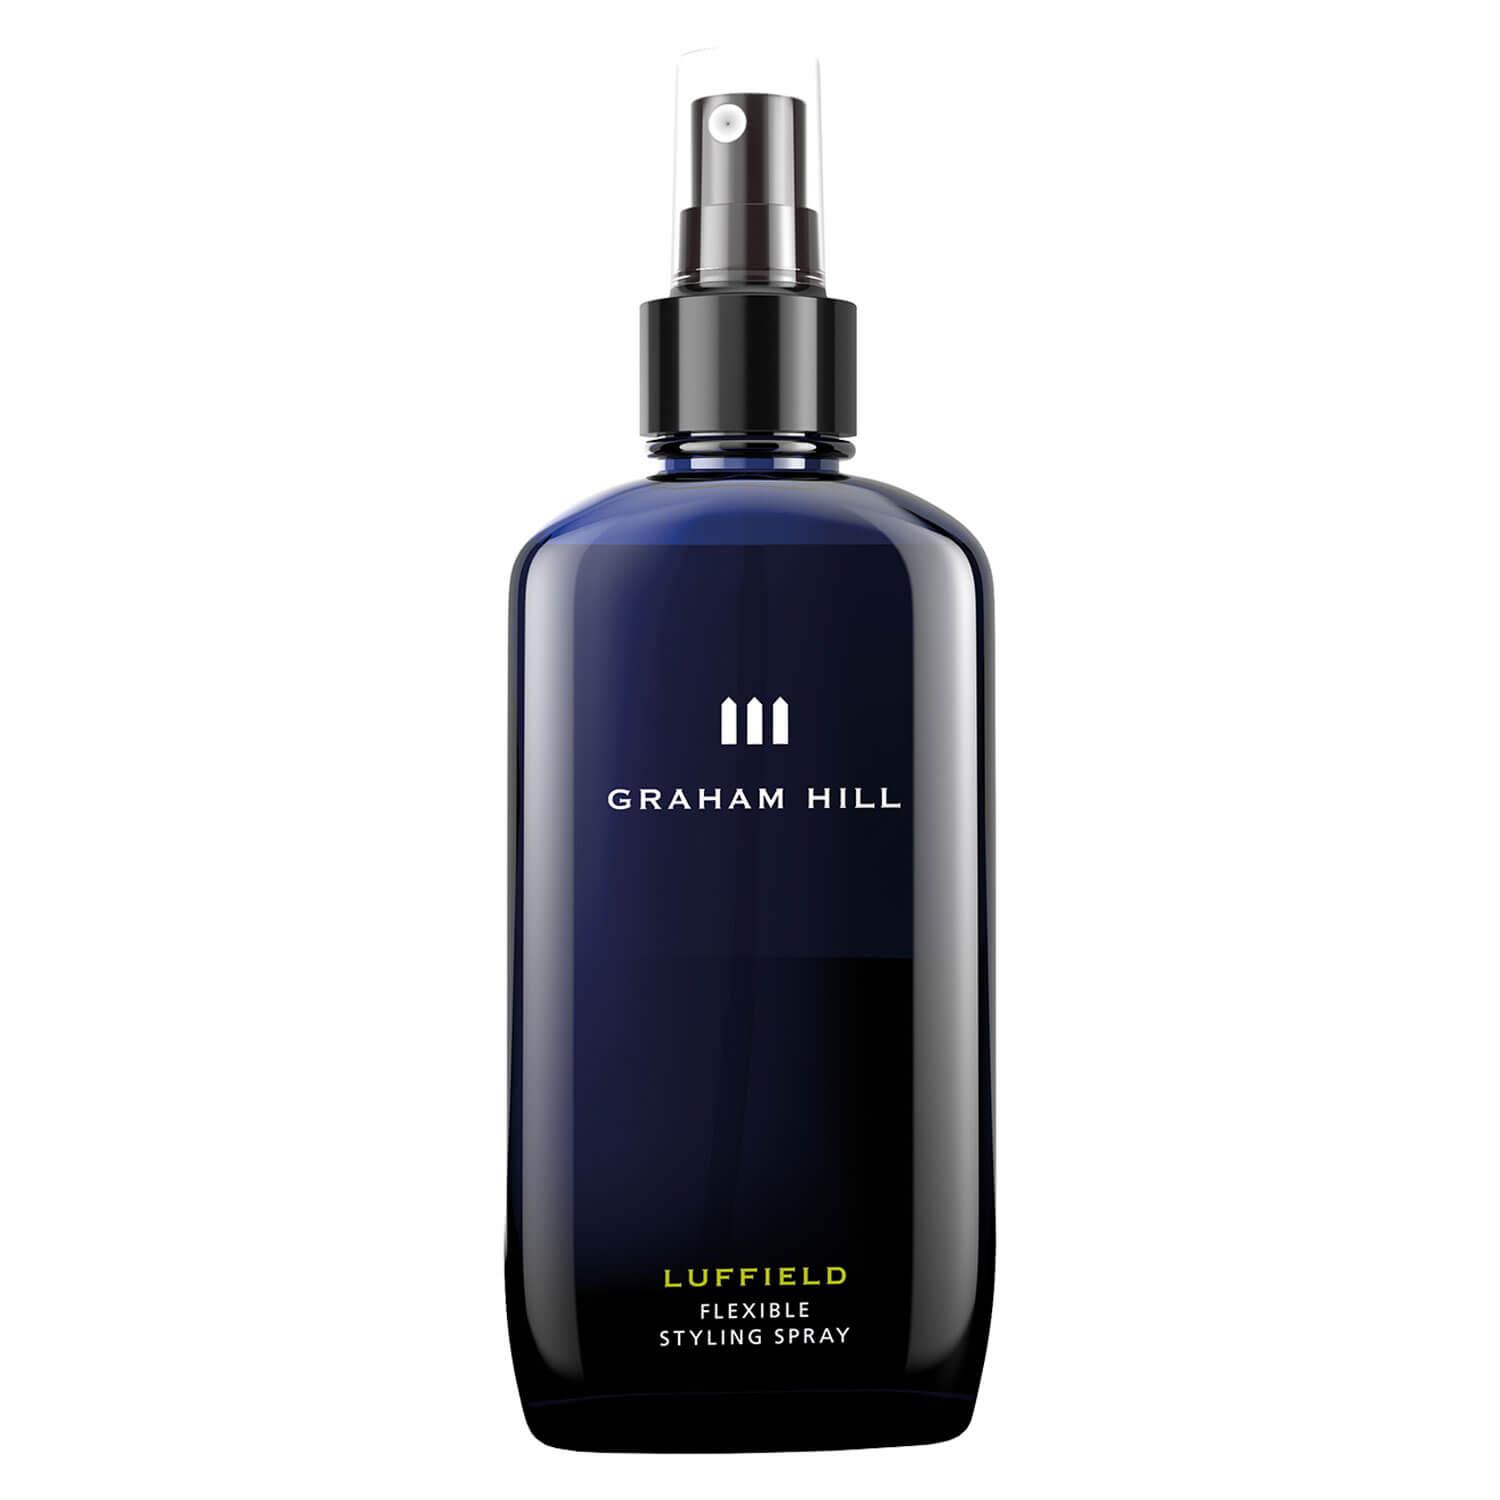 Styling & Grooming - Luffield Flexible Styling Spray